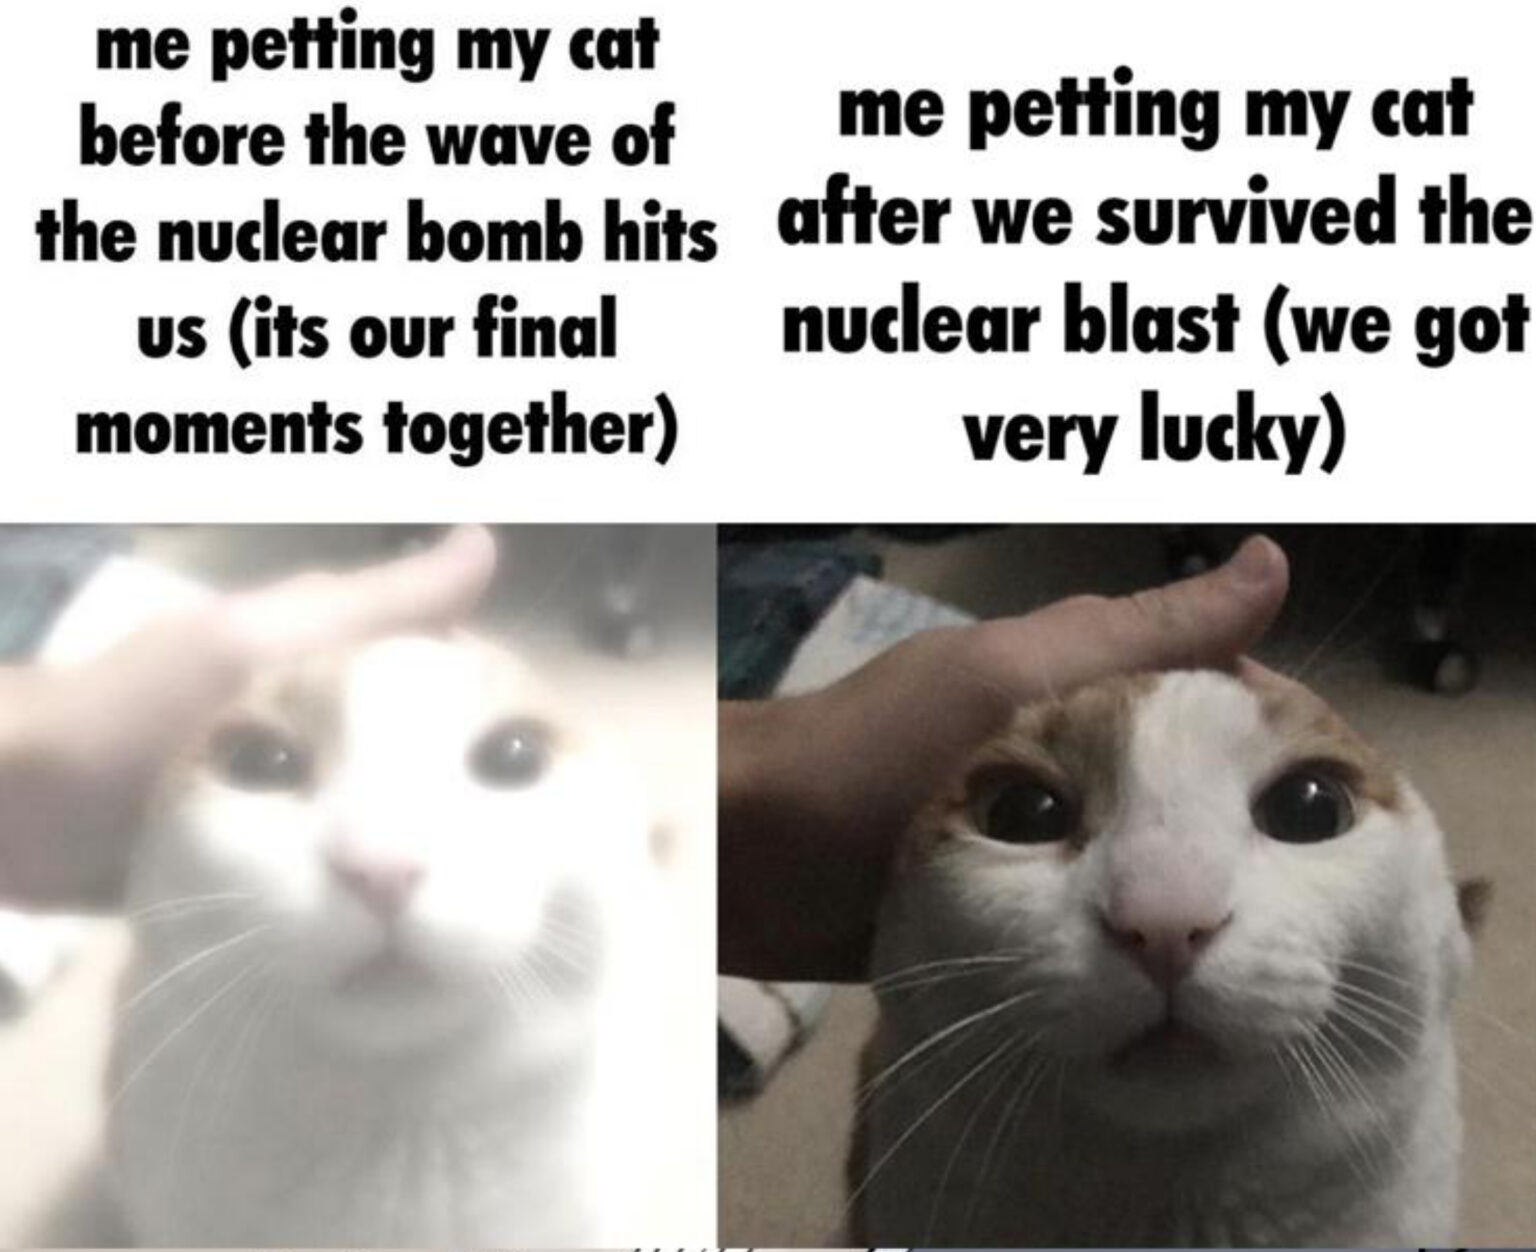 Me Petting My Cat Template And Meme Are Getting Viral On Internet